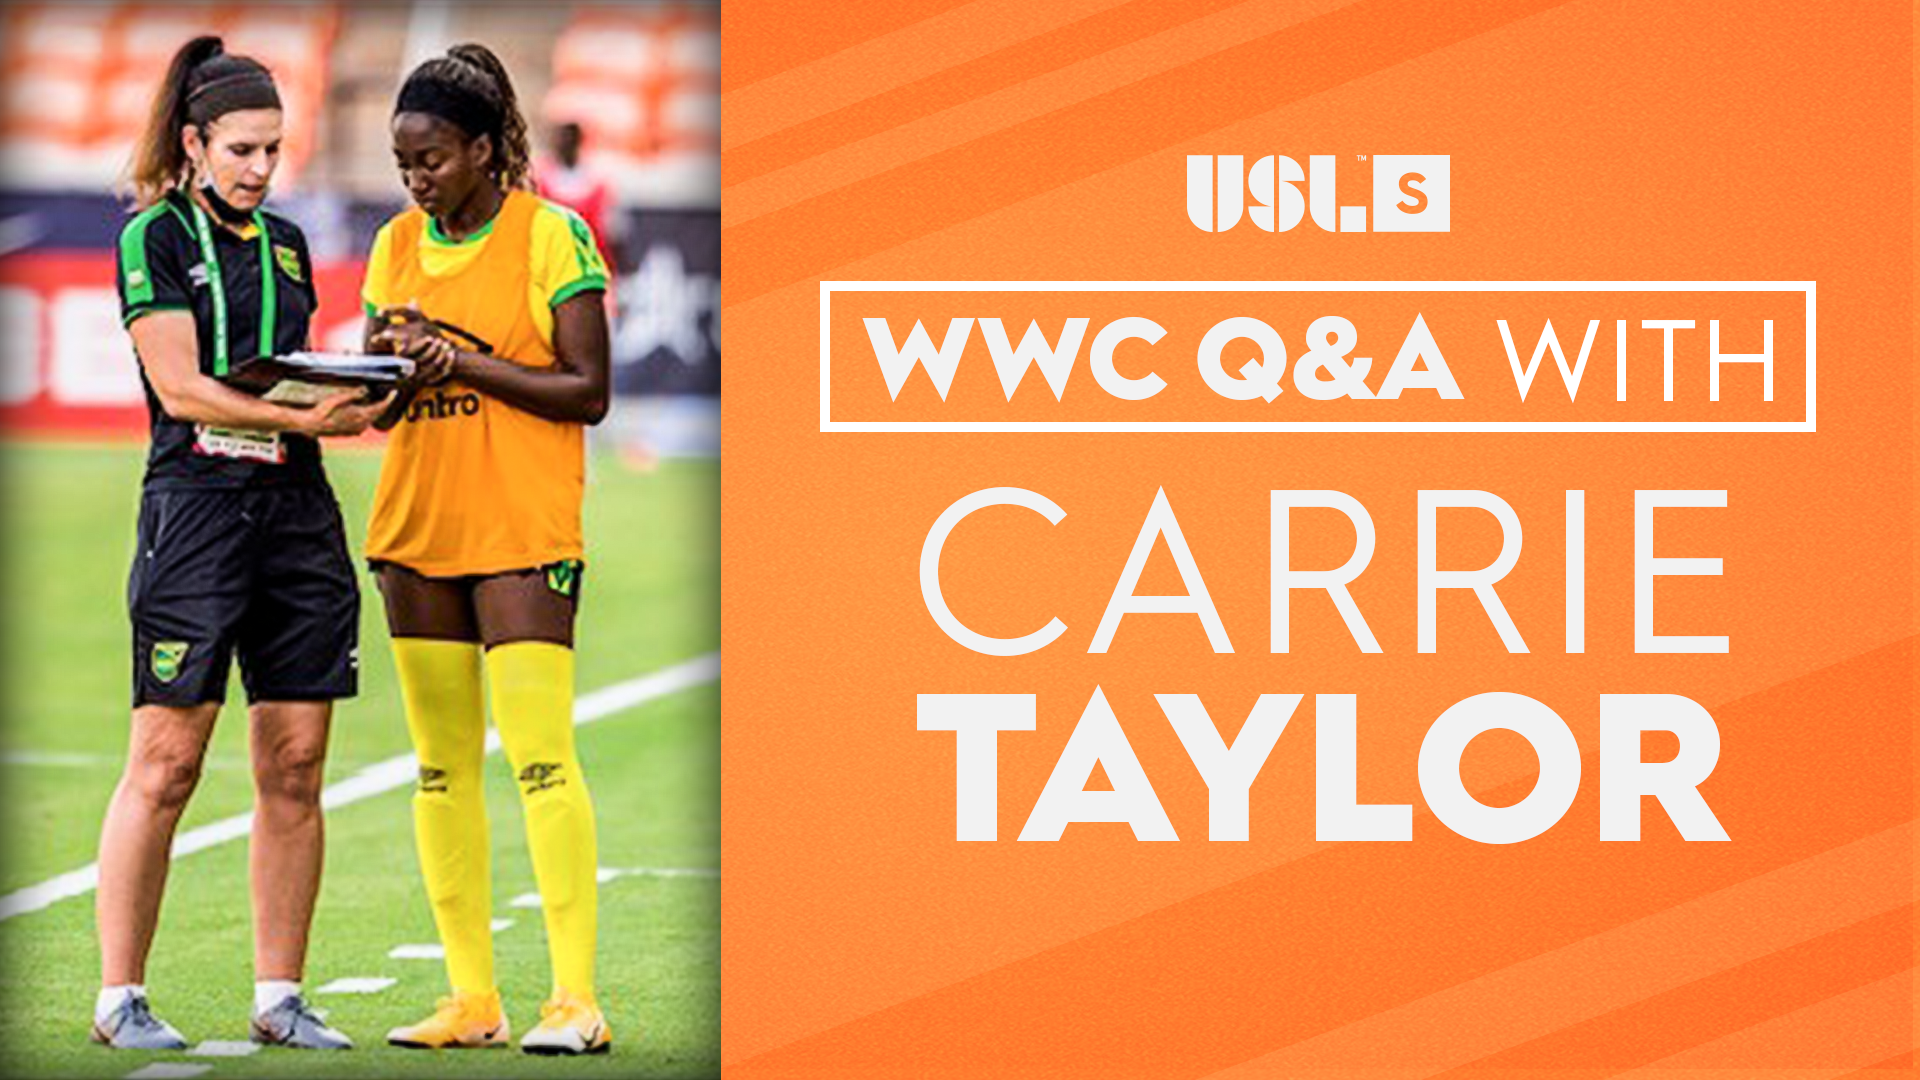 Super League's Carrie Taylor: "The expanded field has opened the world's eyes to the quality players that are out there." featured image